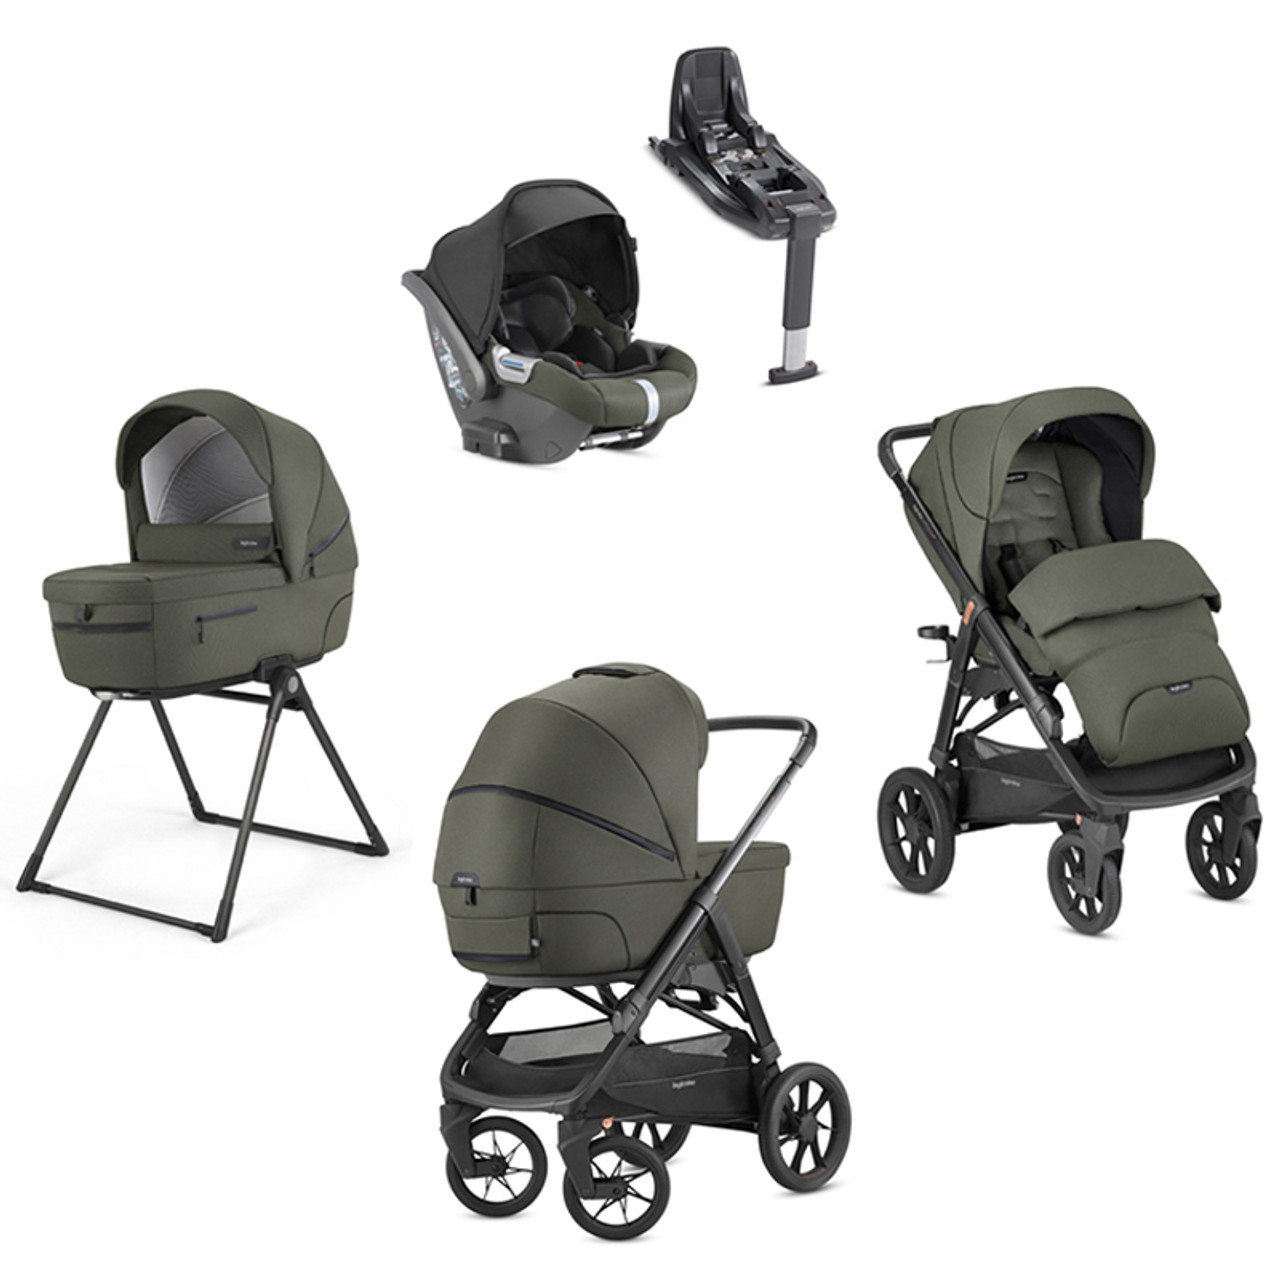 Discover Inglesina's new Aptica System Quattro travel system with